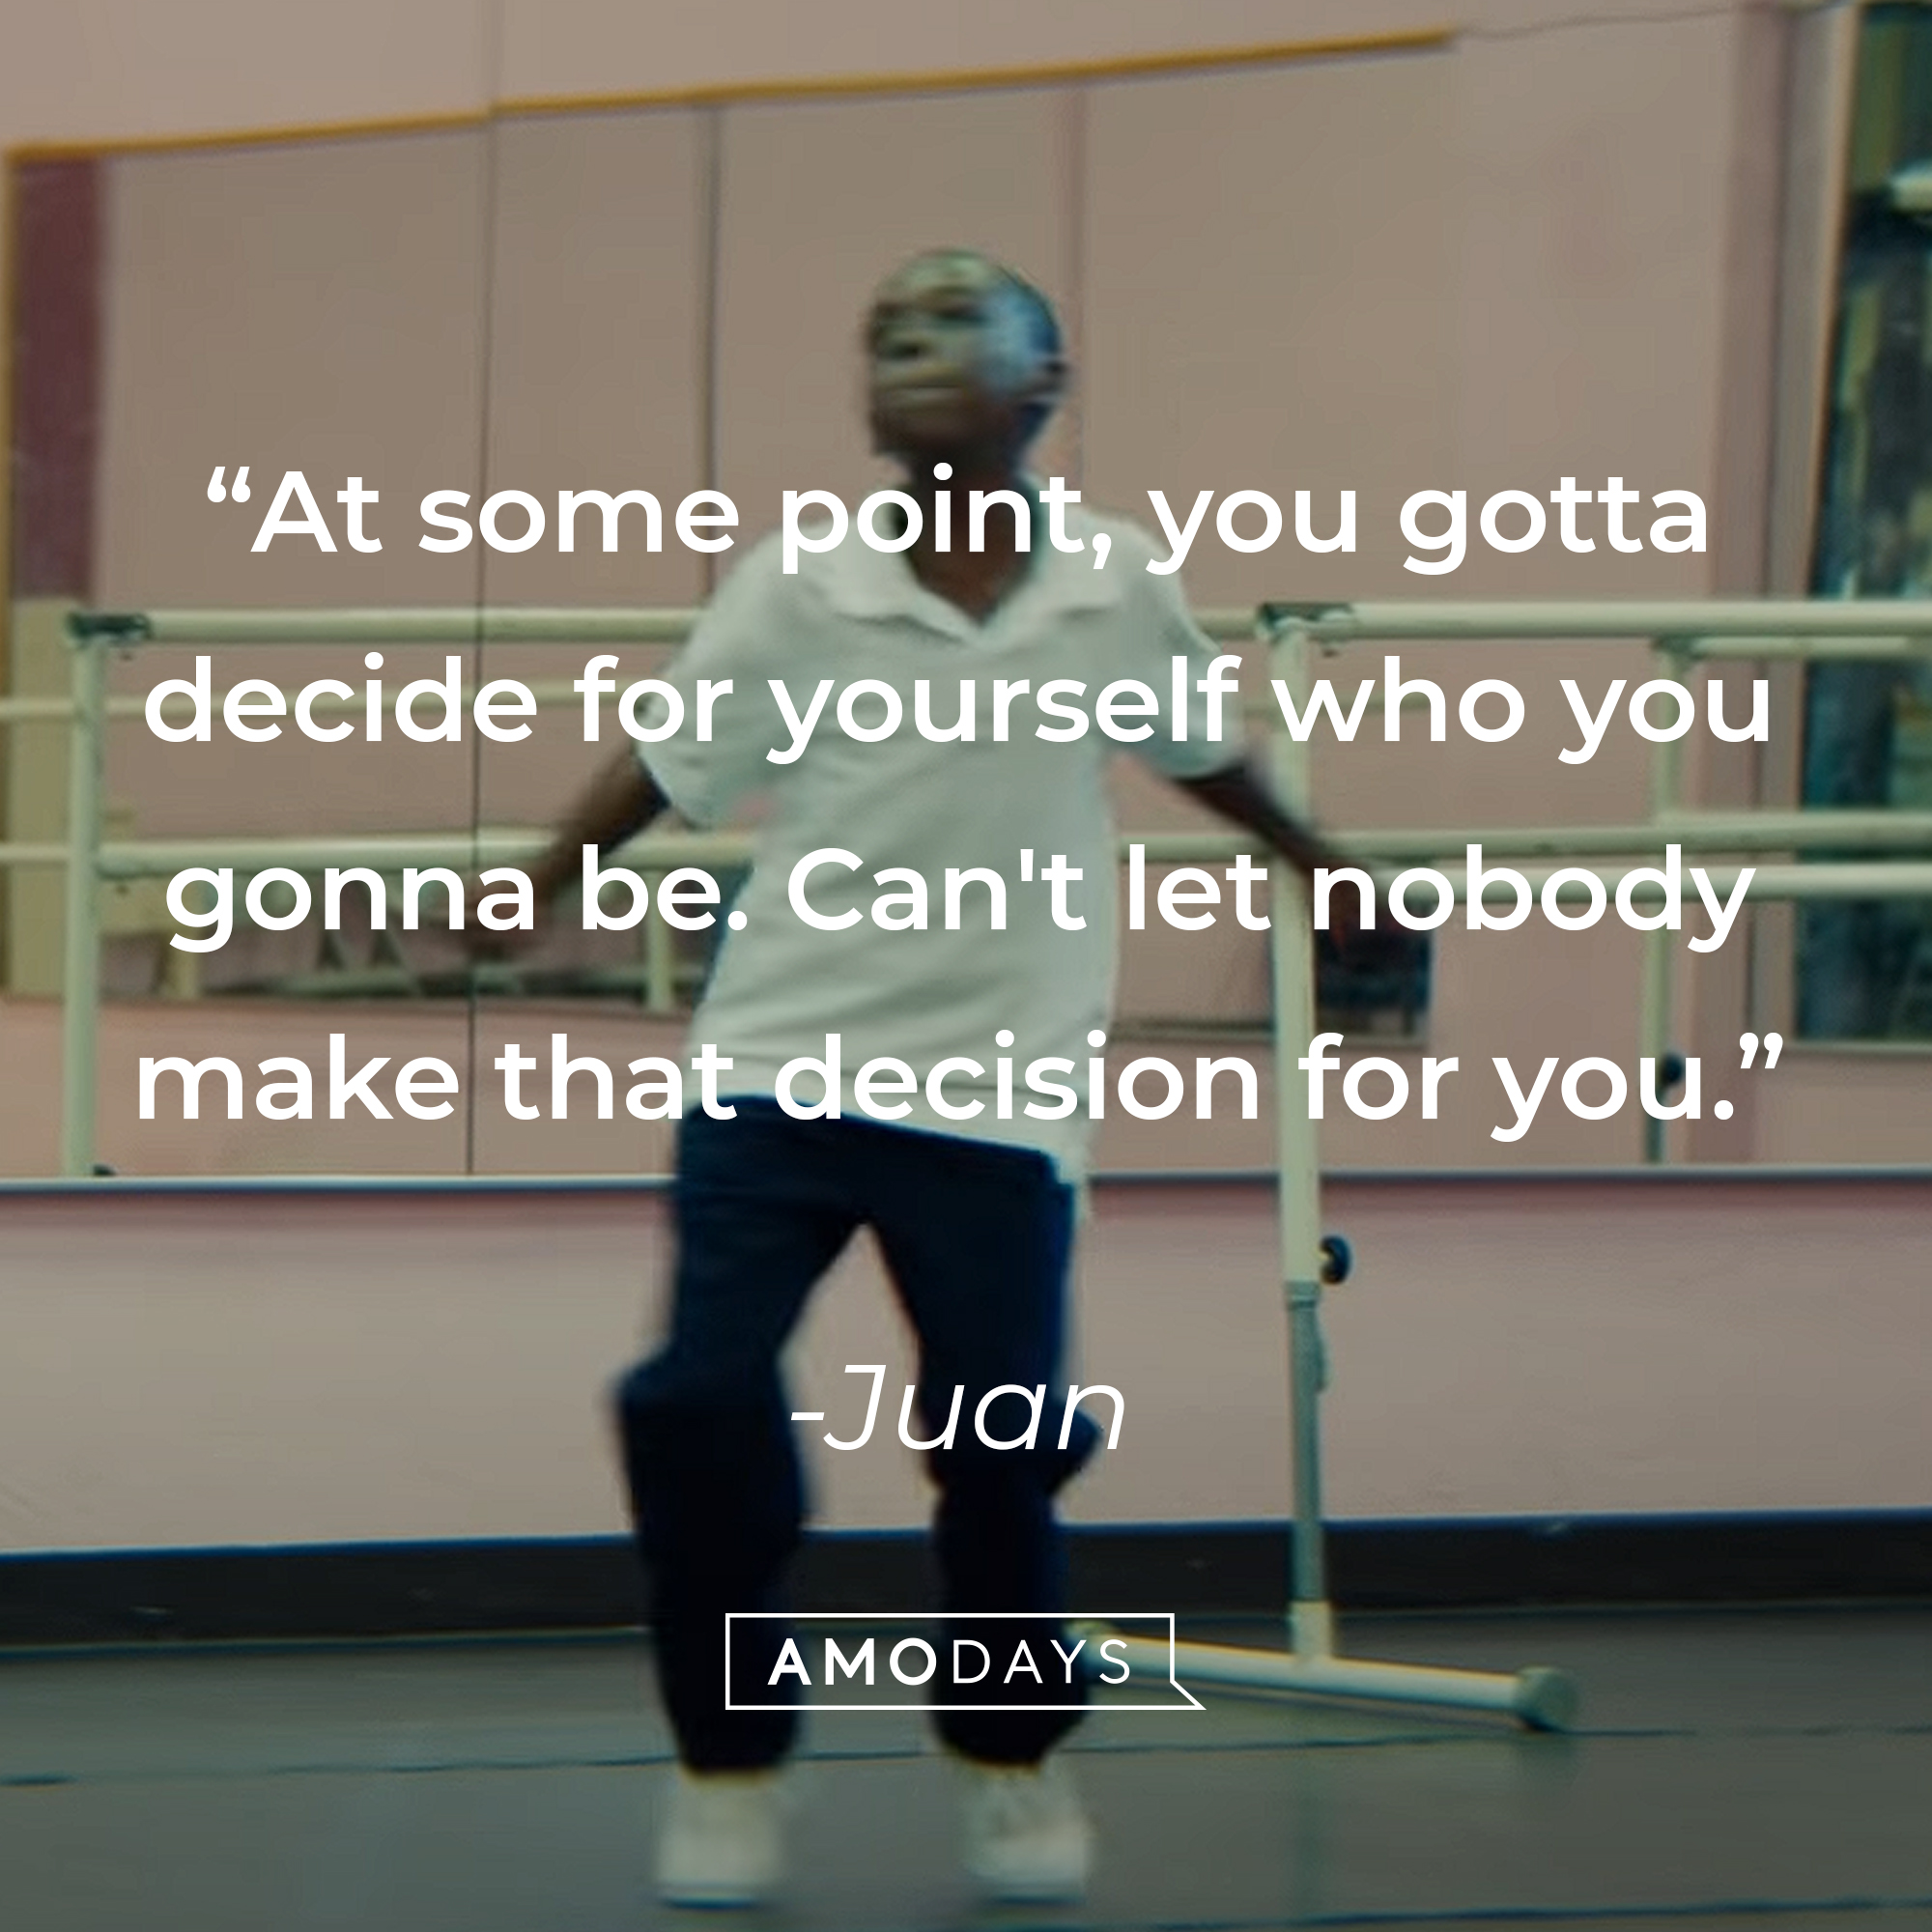 An image of Chiron with Juan’s quote: “At some point, you gotta decide for yourself who you gonna be. Can't let nobody make that decision for you.” | Source: youtube.com/A24